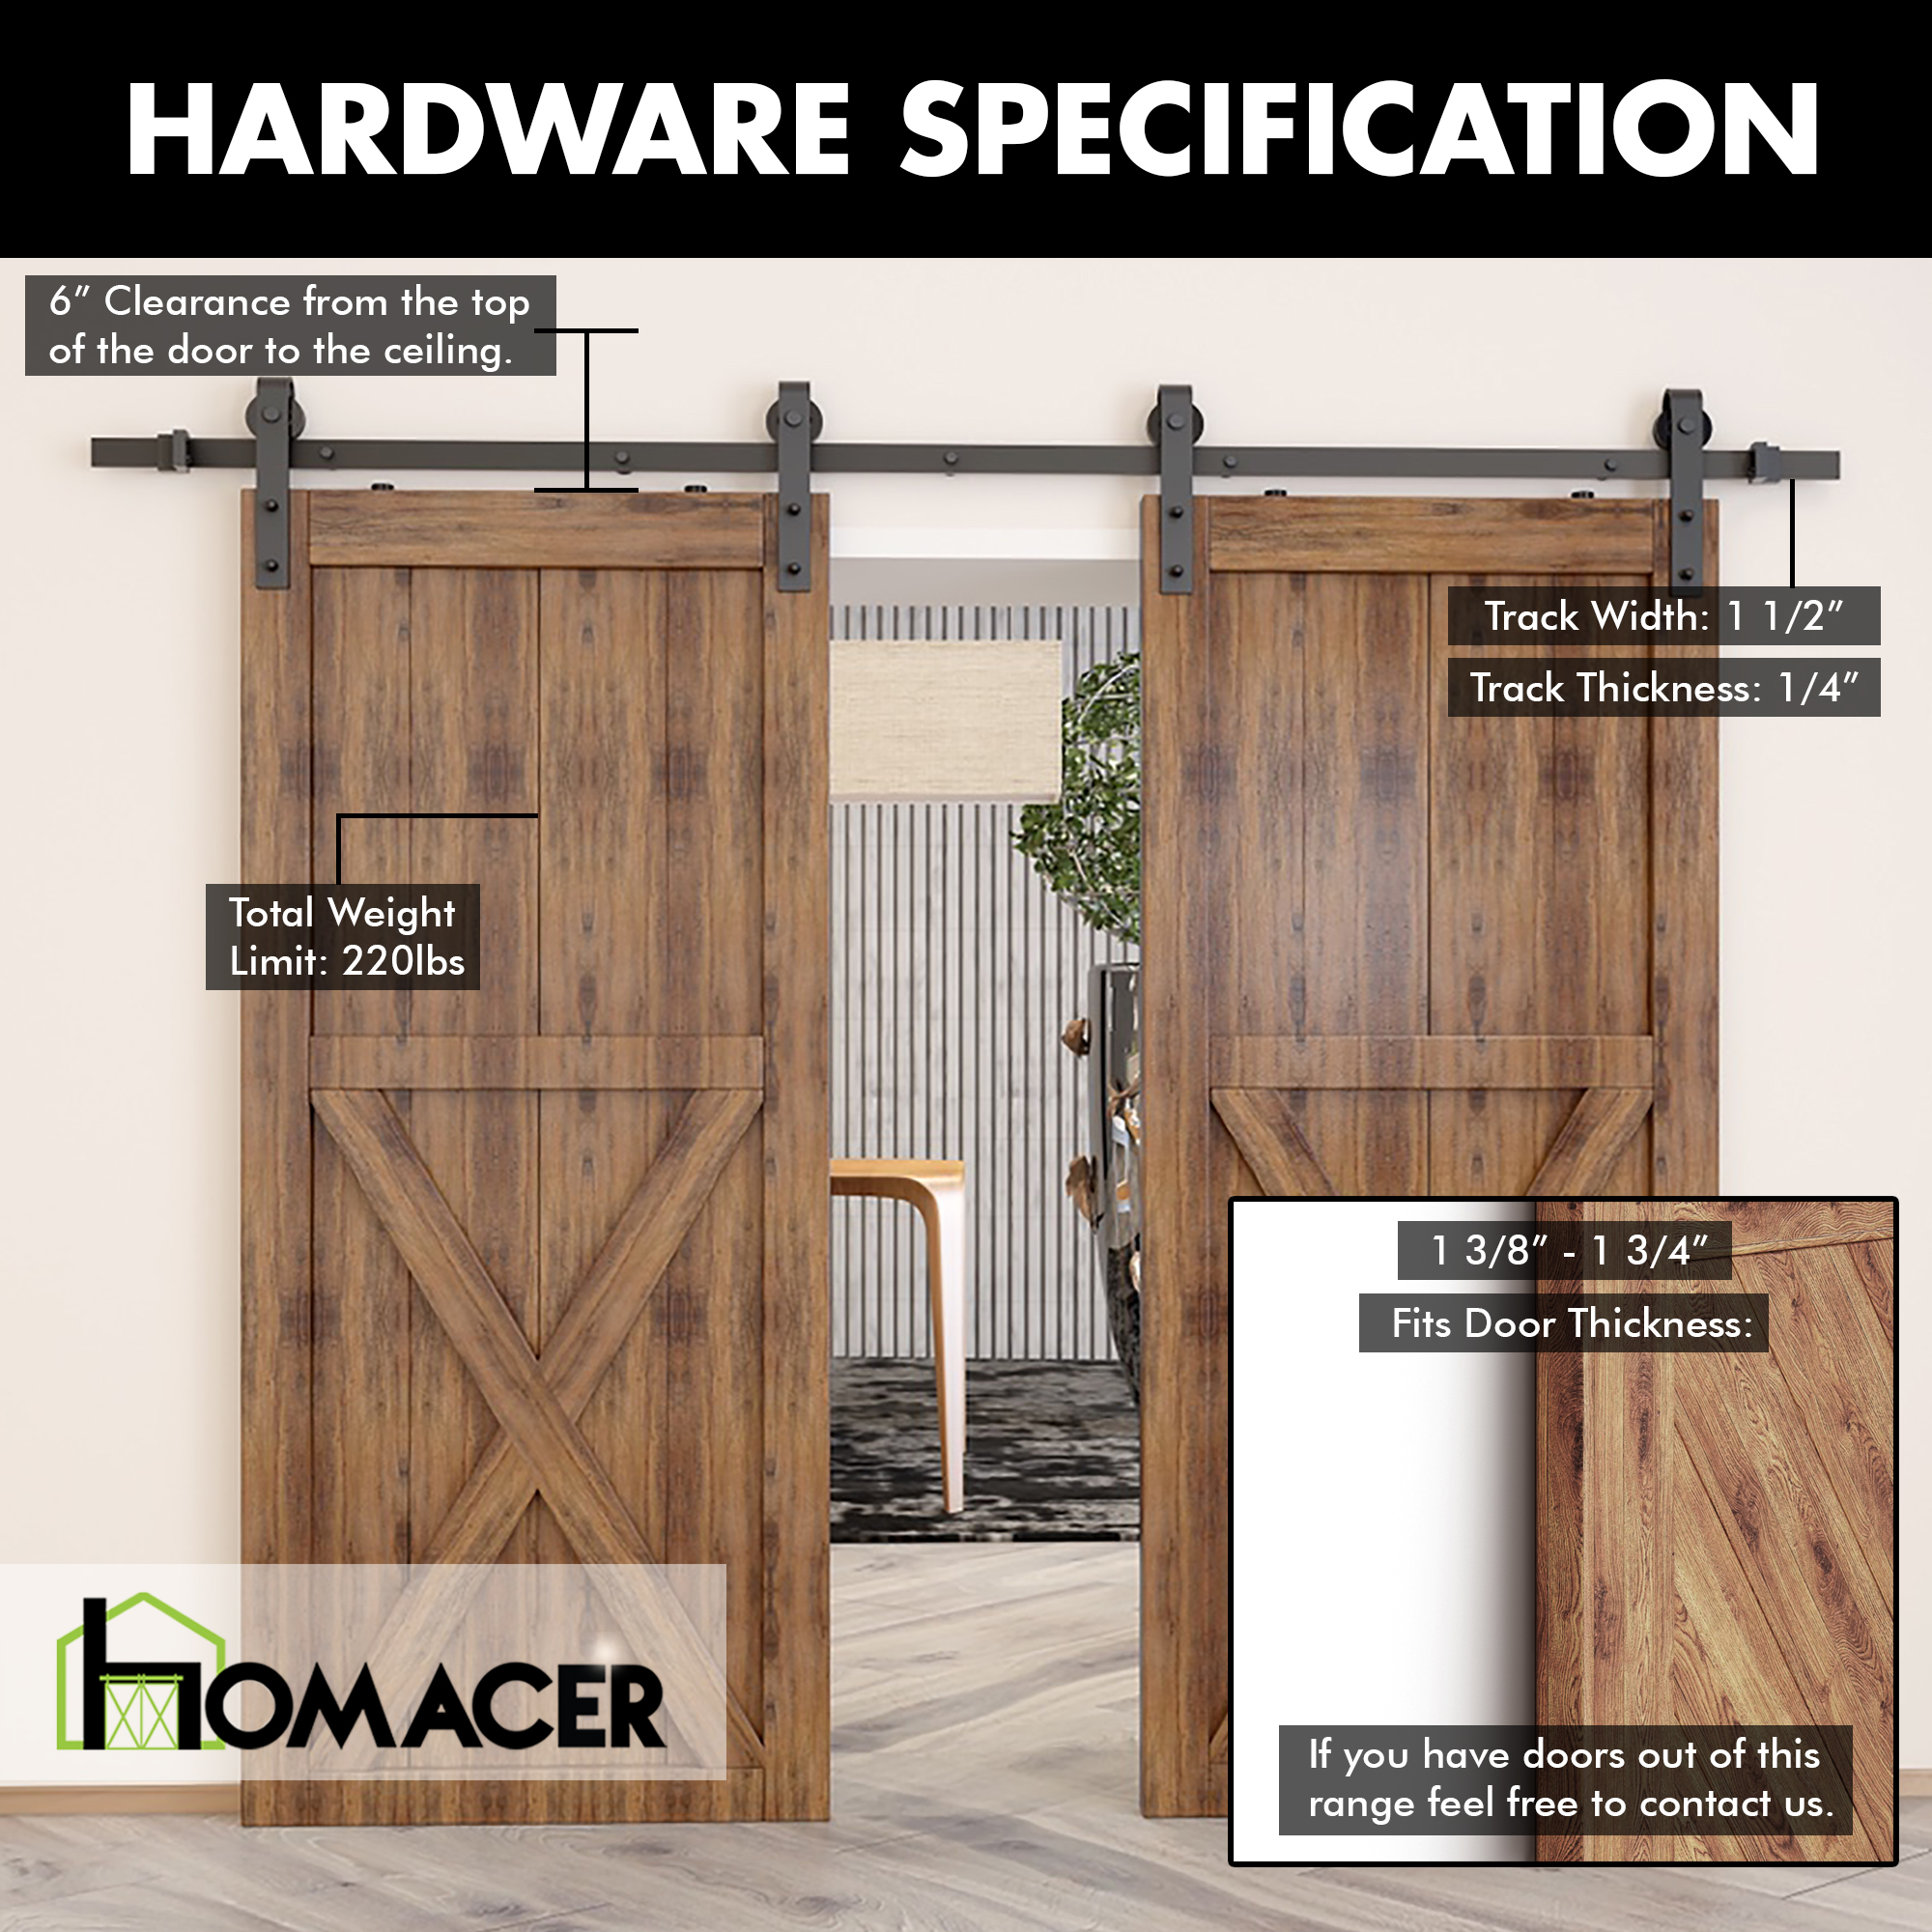 Homacer Black Rustic Sliding Barn Door Hardware Kit, for Two/Double Doors, 8ft Long Flat Track, Classic Design Roller, Heavy Duty, for Interior & Exterior Use - image 4 of 7